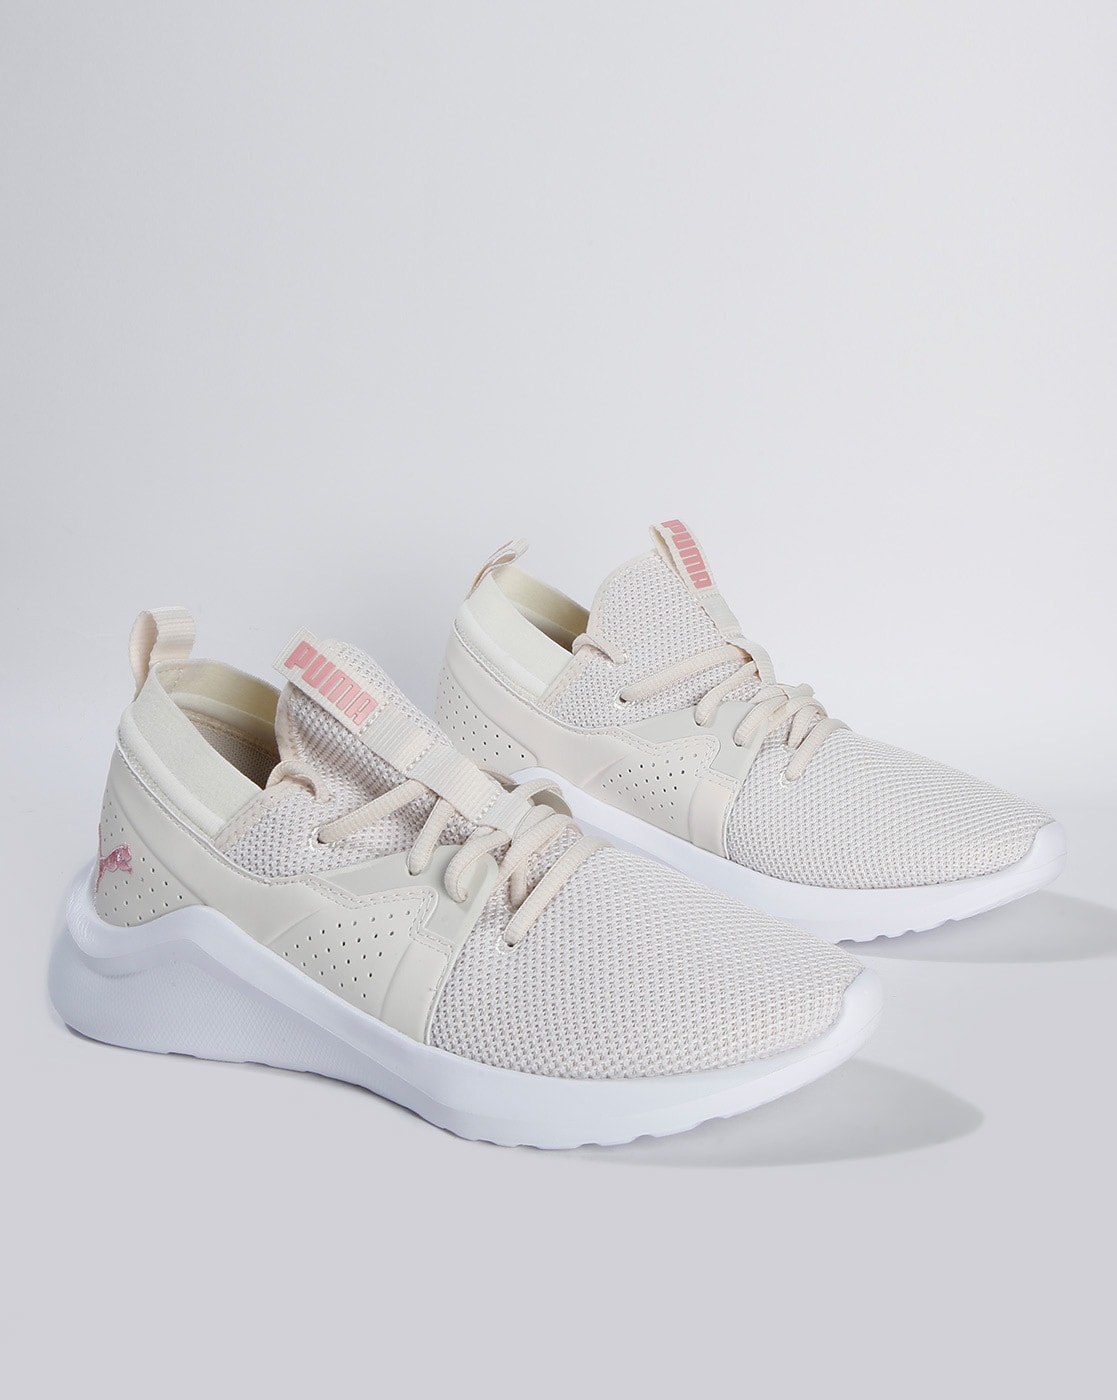 Cream Sports Shoes for Women by Puma 